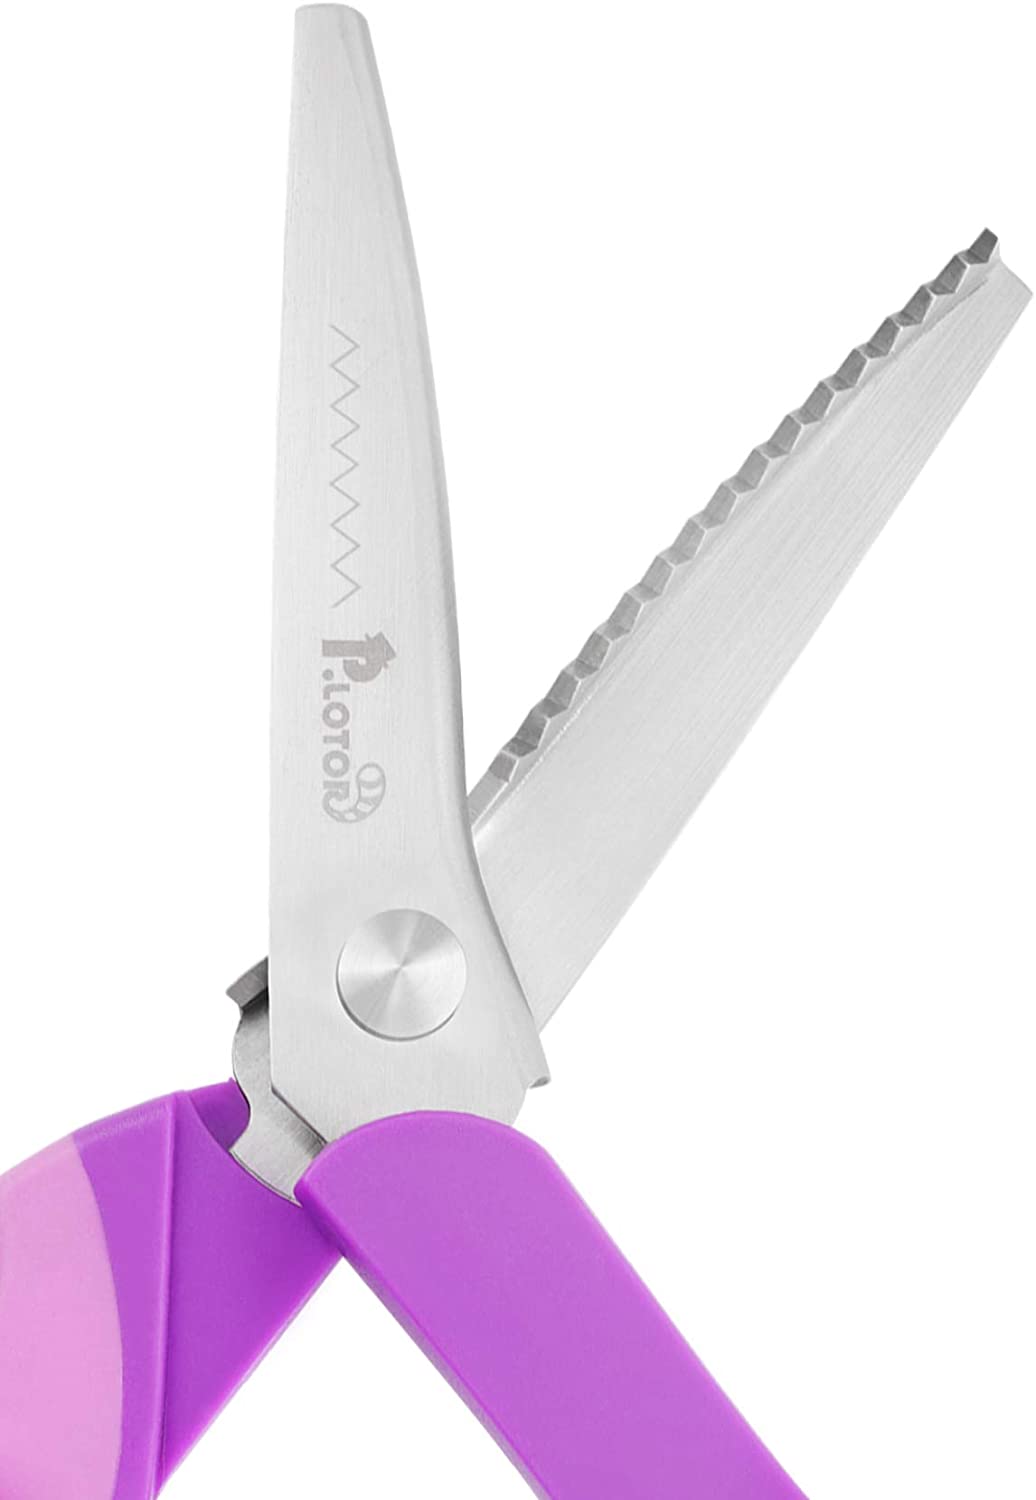 Sewing Pinking Shears for Fabric Paper Leather Professional Craft Scissors with Sharp Stainless Steel Blades, P.LOTOR Lightweight Serrated Scissors with Comfortable Handle 9.3 Inch - (For 1 piece(s))